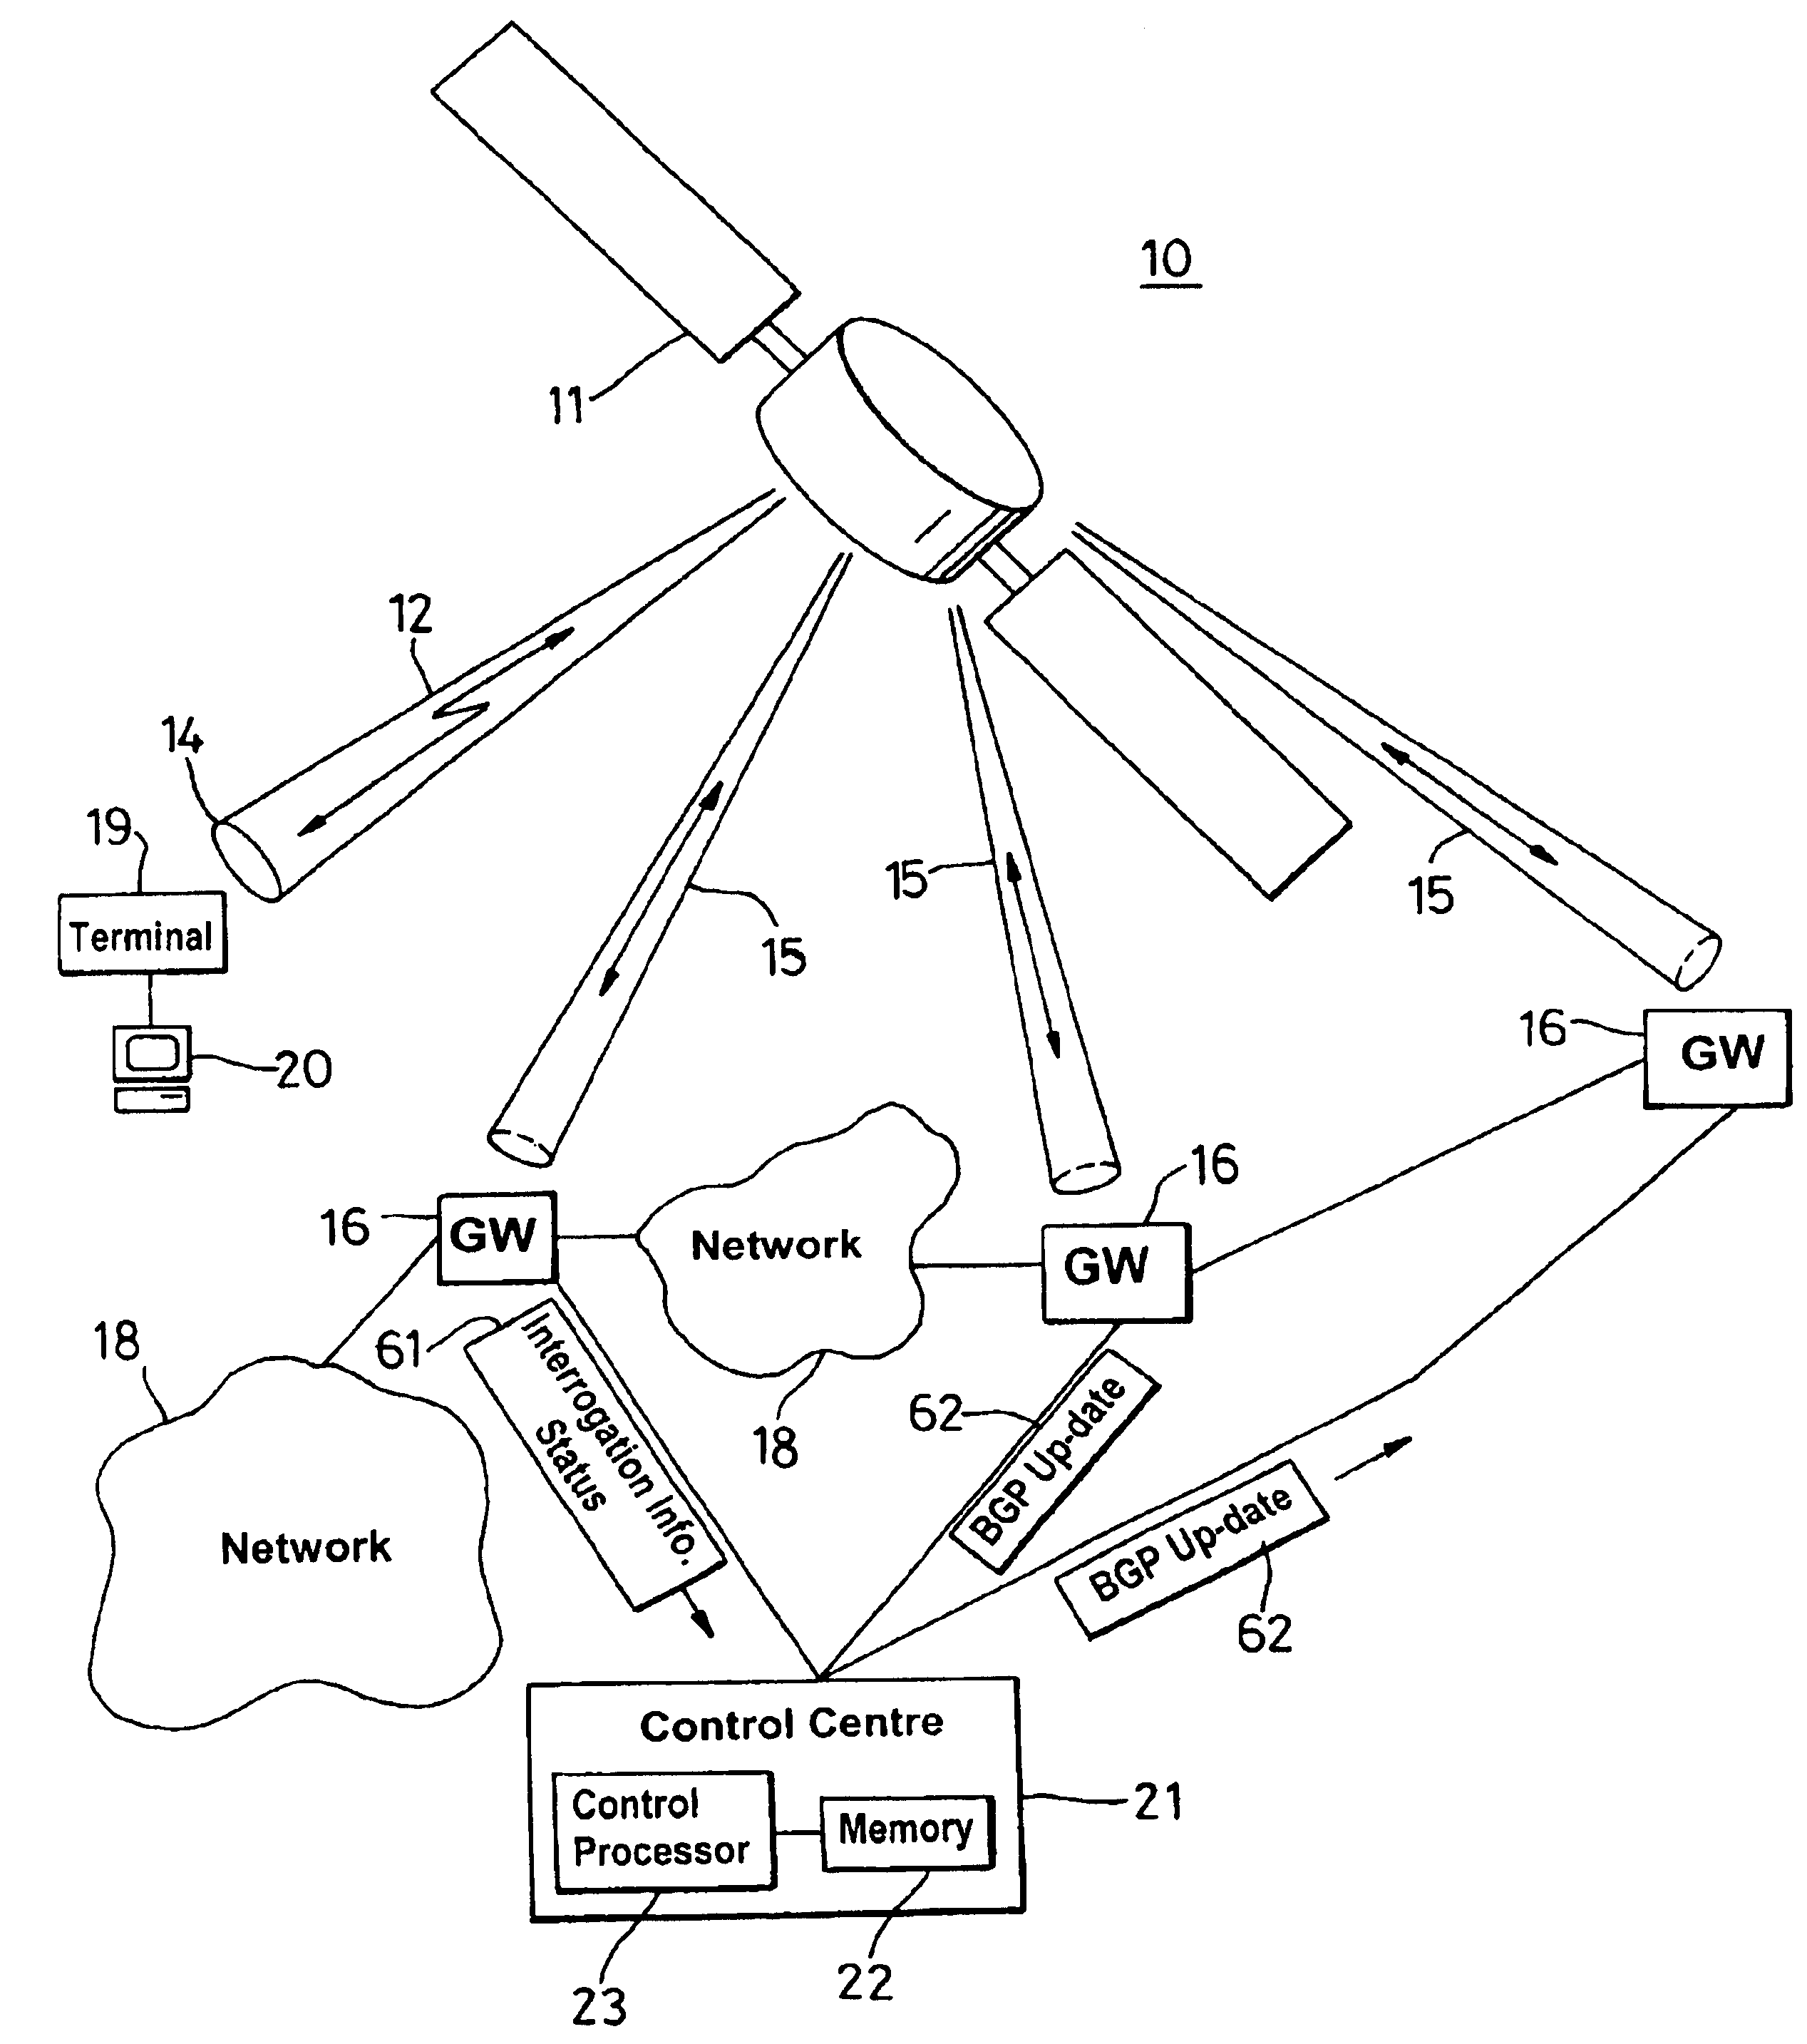 Border gateway protocol manager and method of managing the selection of communication links